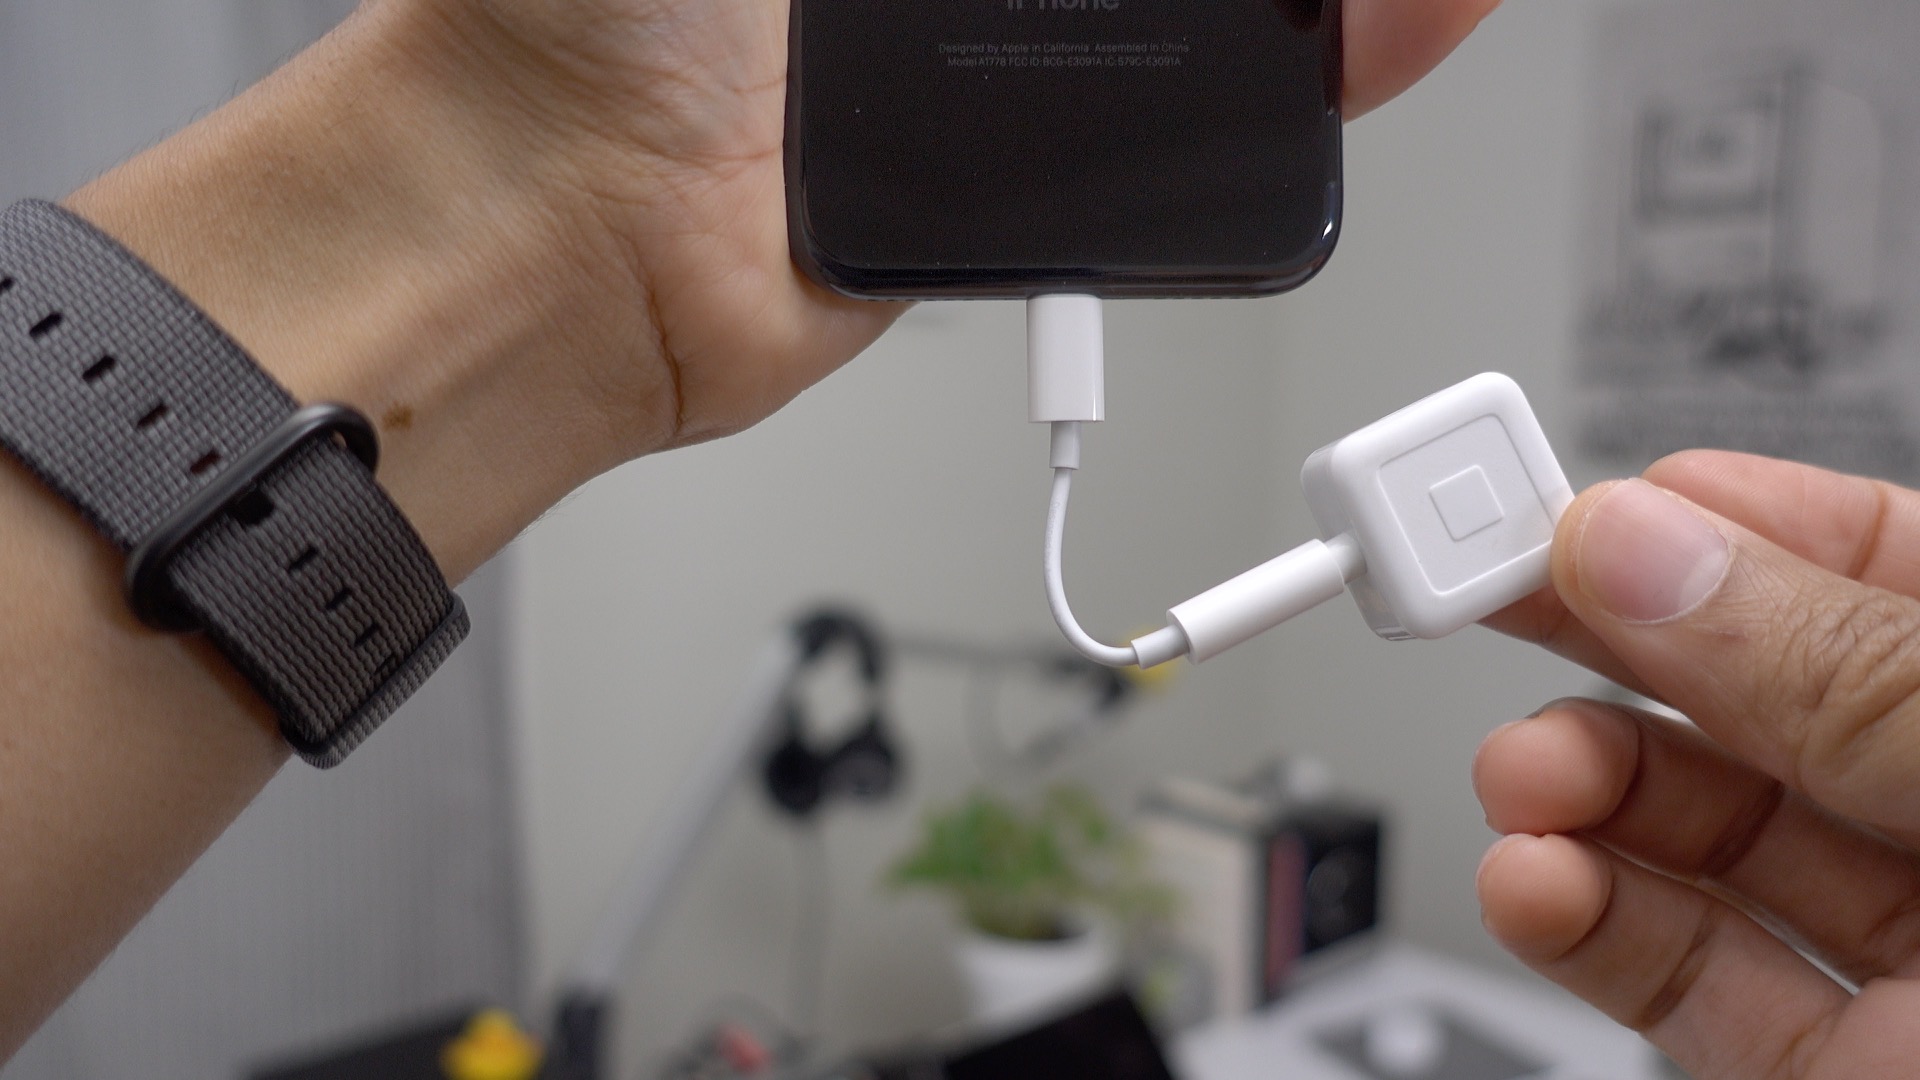 Hands-on: How the new Lightning EarPods compare to the old 3.5mm EarPods  [Video] - 9to5Mac